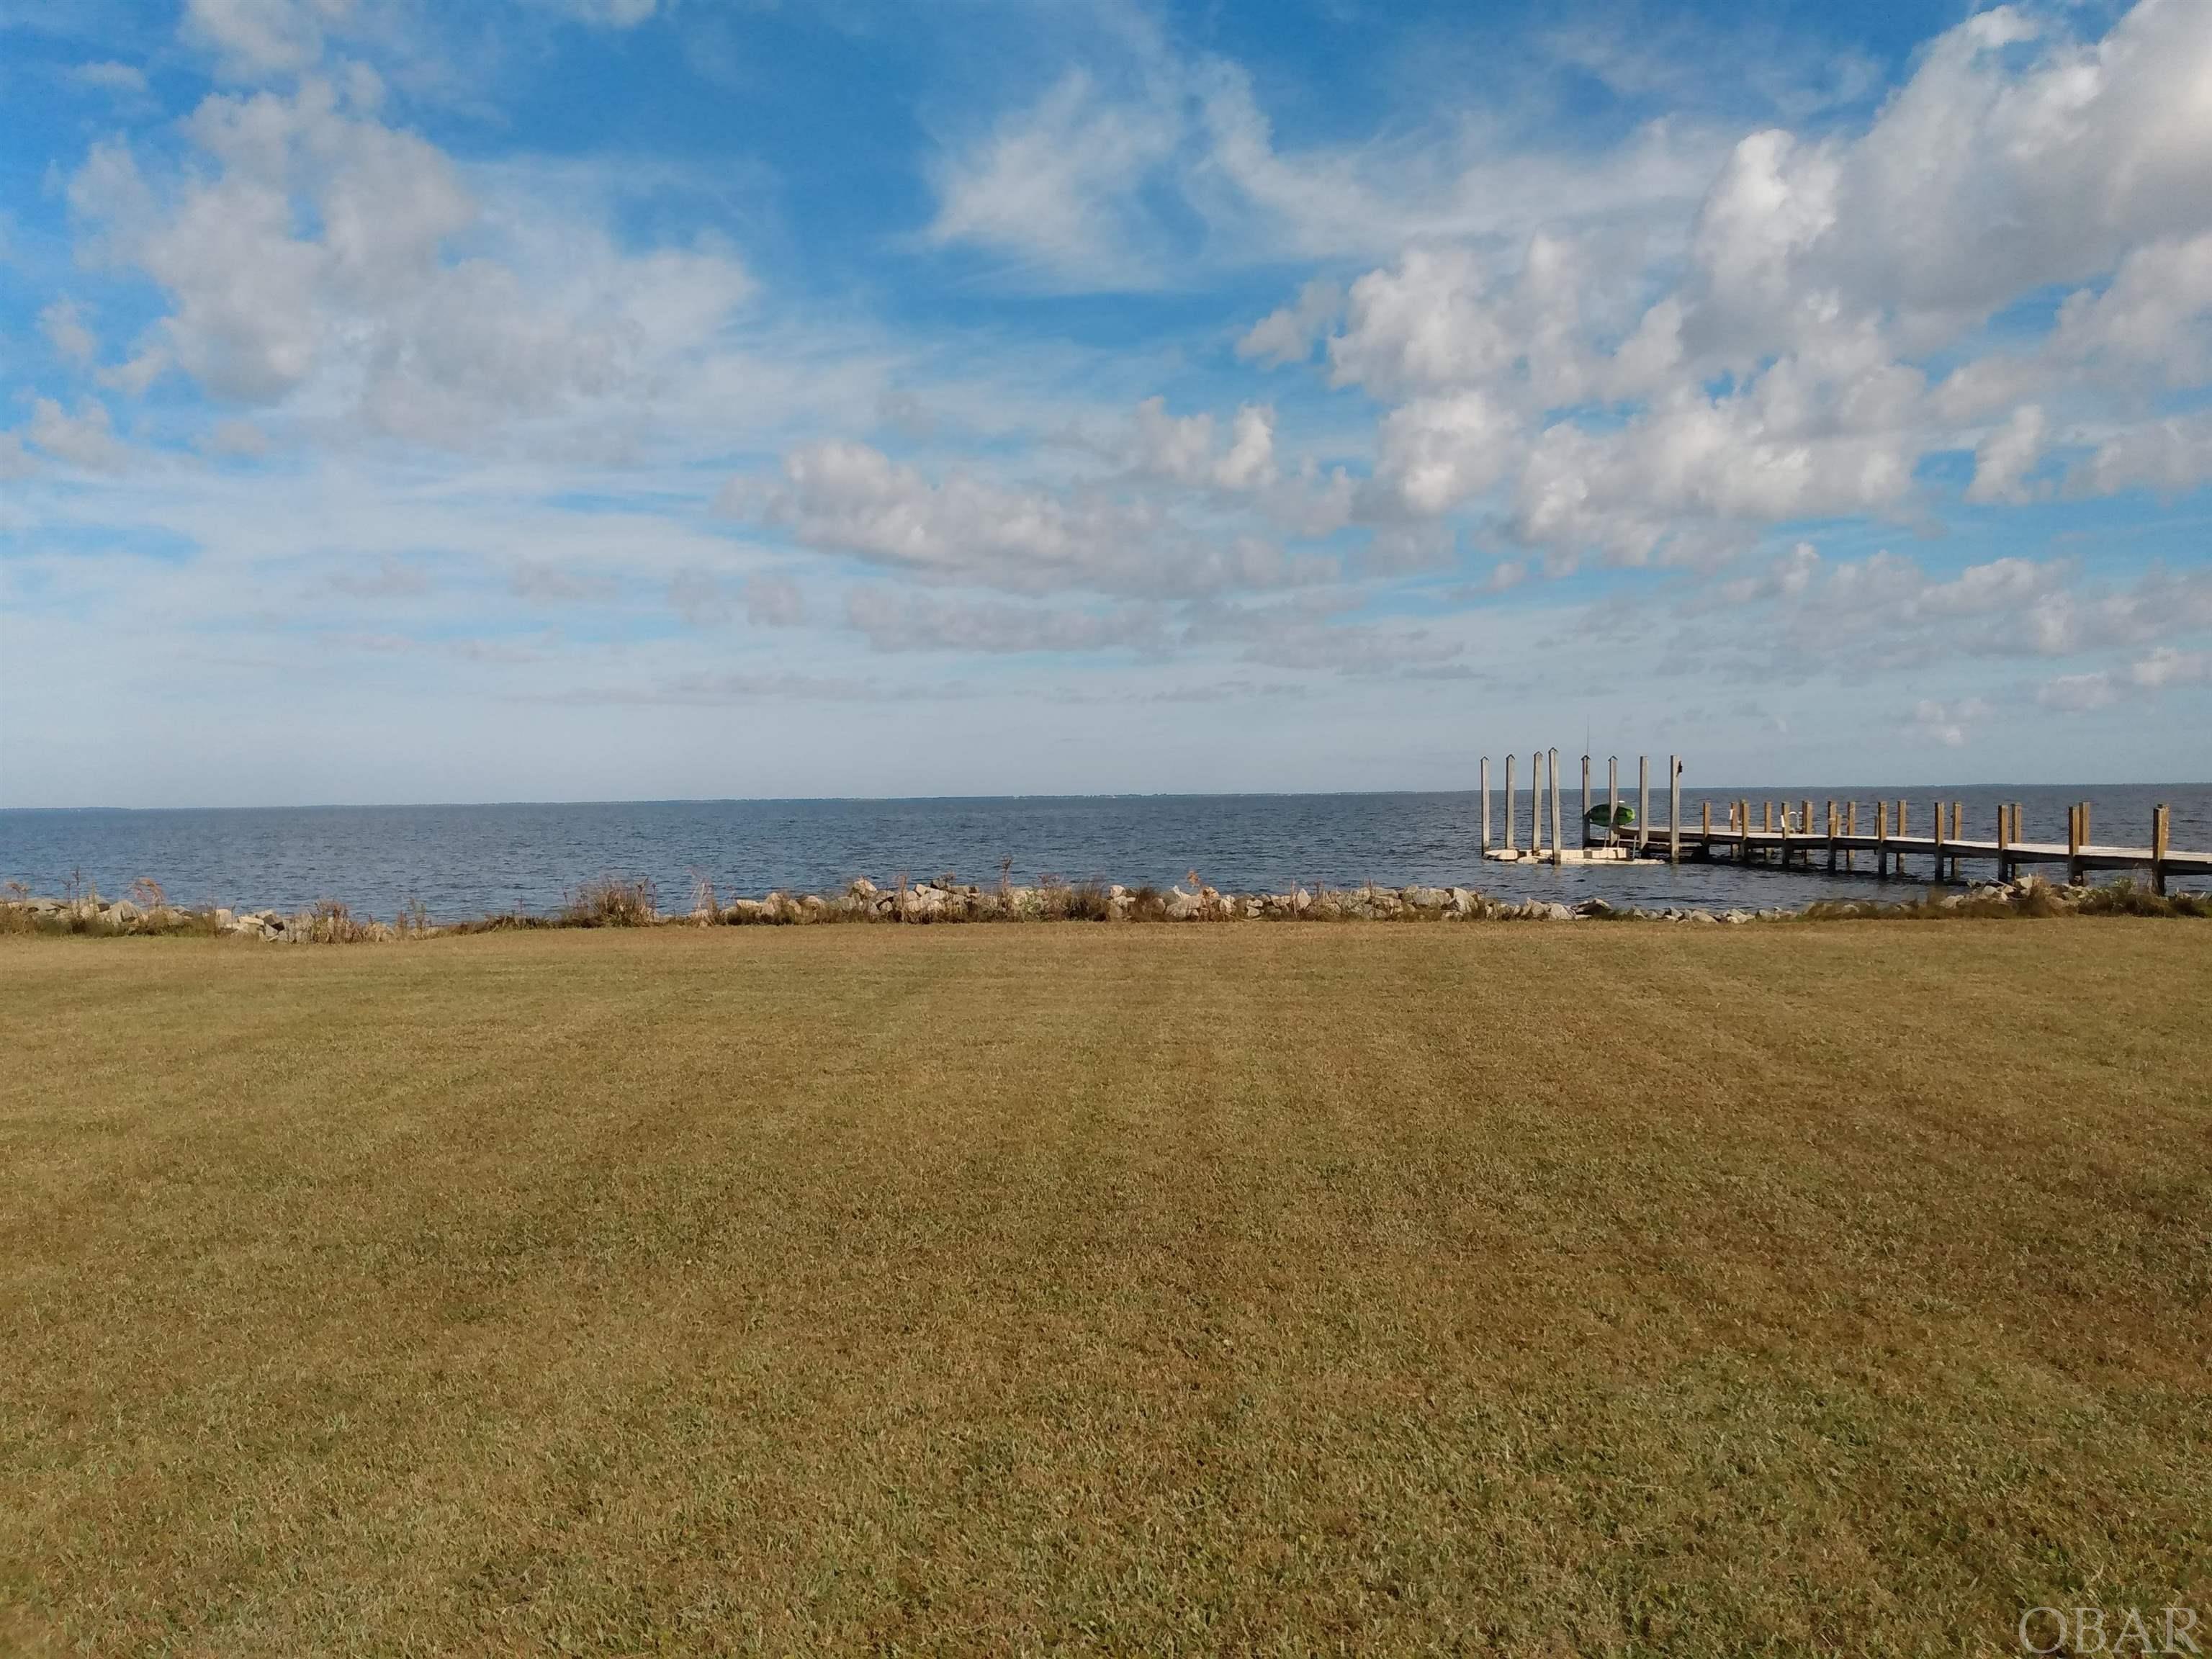 Waterfront Lot #6- Albemarle Sound Estates This well- maintained waterfront lot is priced to sell! Enjoy spectacular water views and gorgeous sunsets of the Albemarle Sound from this property! it has the rip- rap shoreline stabilization structure and underground utilities. Perk Approved! Ready to build your waterfront home on! Nice neighborhood! There is a water access commons area and a small boat ramp which leads into the Sound. To enhance your access to the water you could possibly build a pier, dock and boat lift in the water. This property has the potential to meet all of your enjoyment and watersports needs! Just 5 miles north of Columbia, NC and within an hour to the NC Outer Banks! Offered at $75,500.